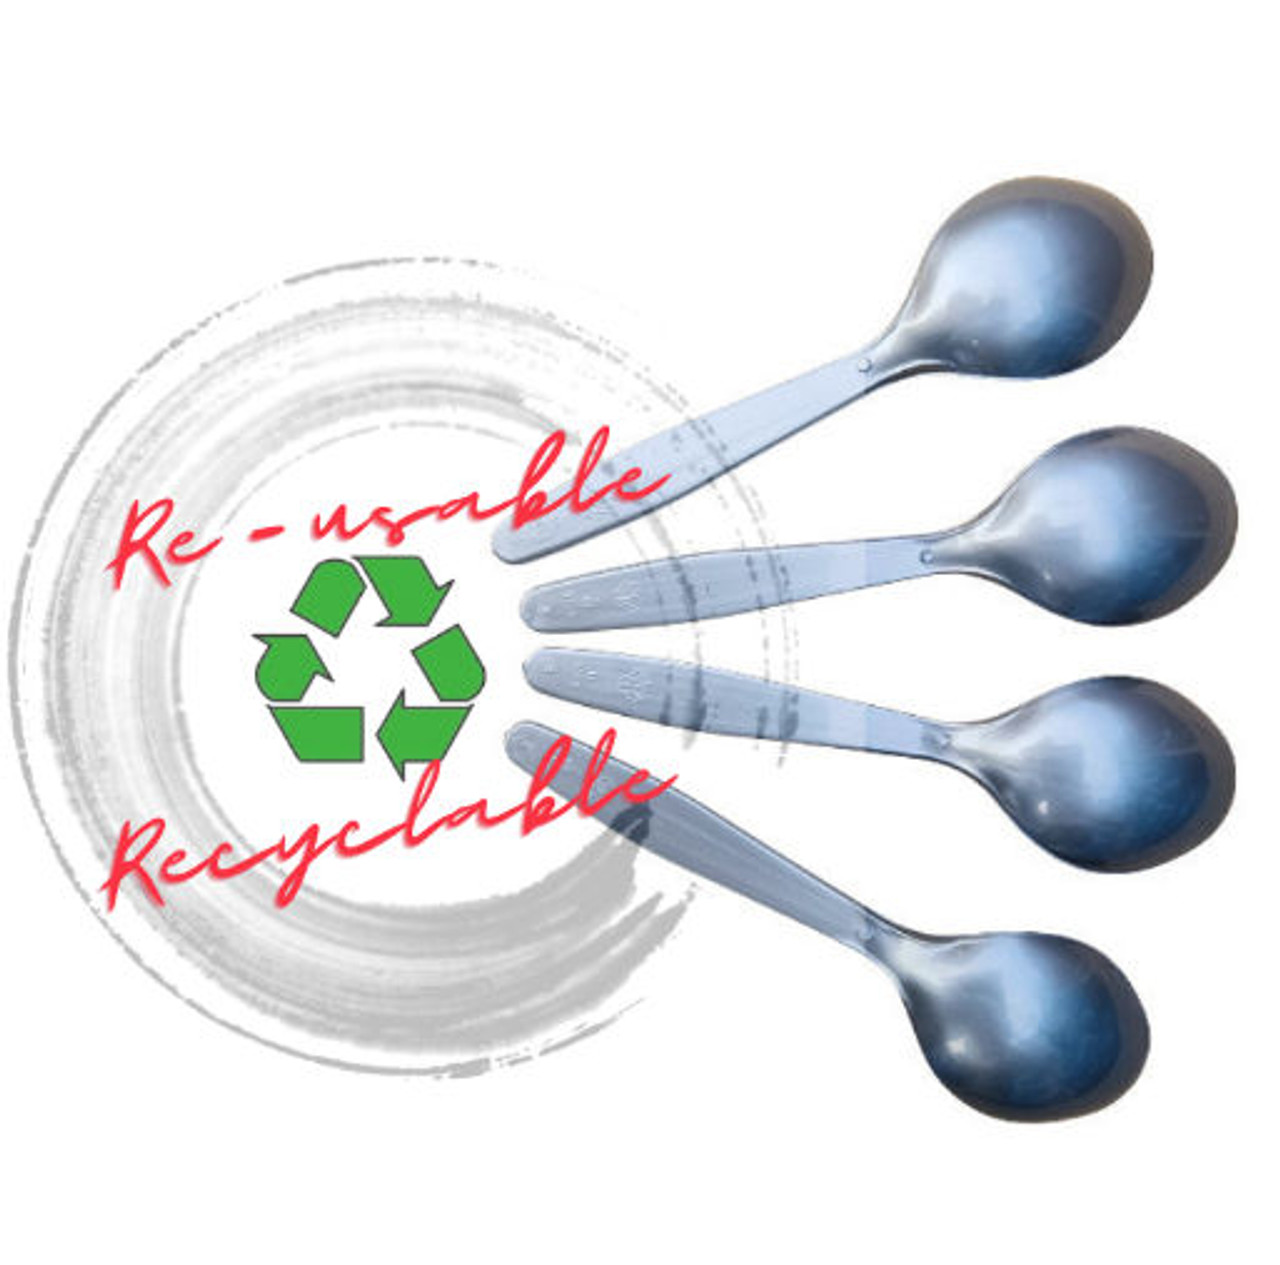 Re-usable / Recyclable Strong Plastic Silver effect Spoons packed in 100's